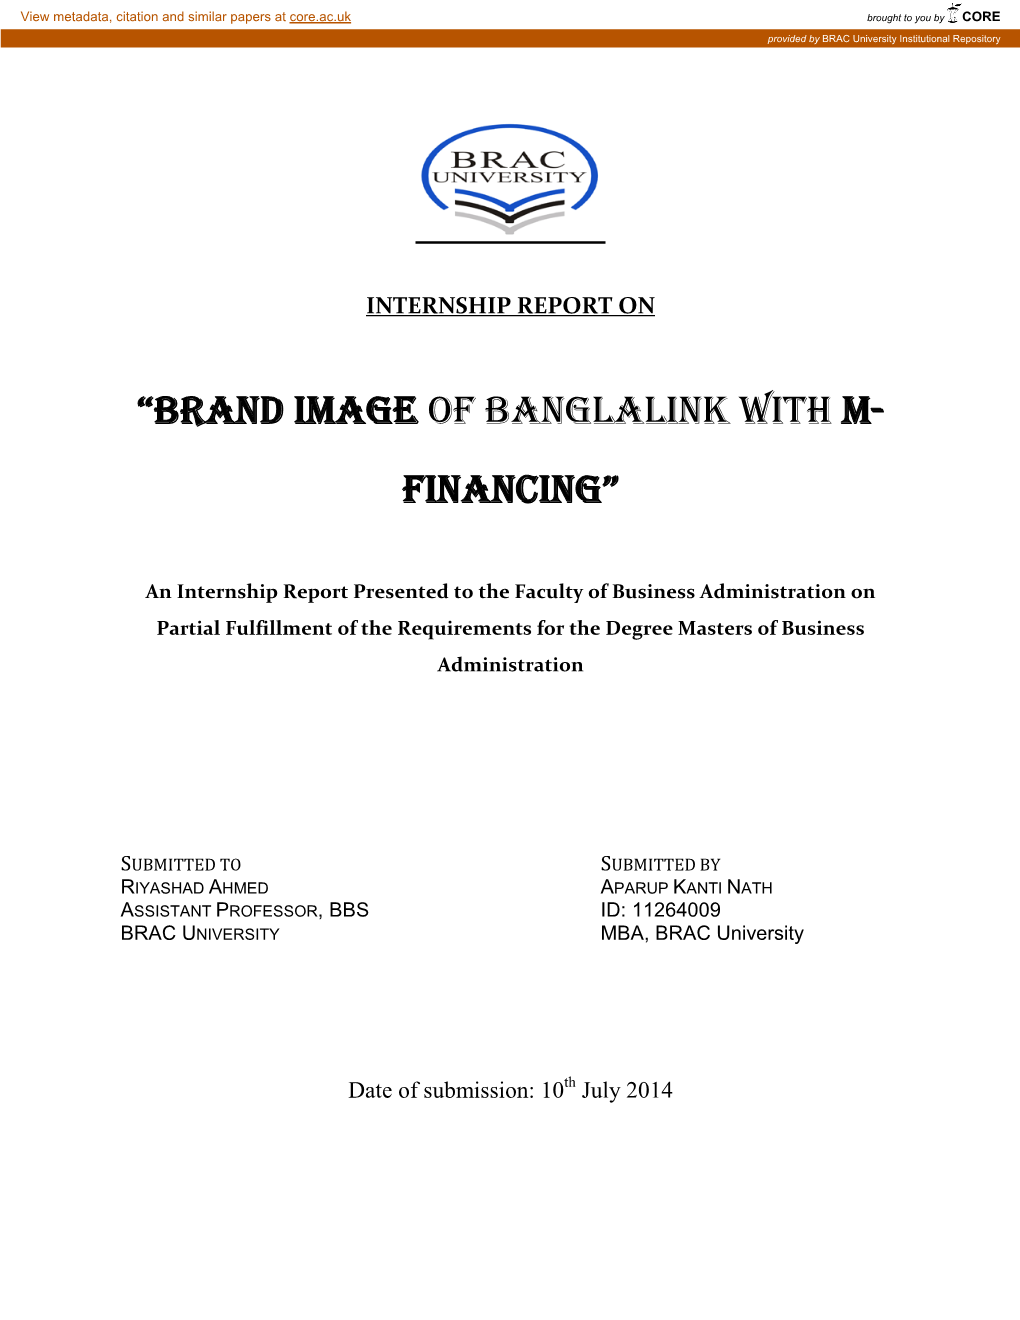 “Brand Image of Banglalink with M- Financing”